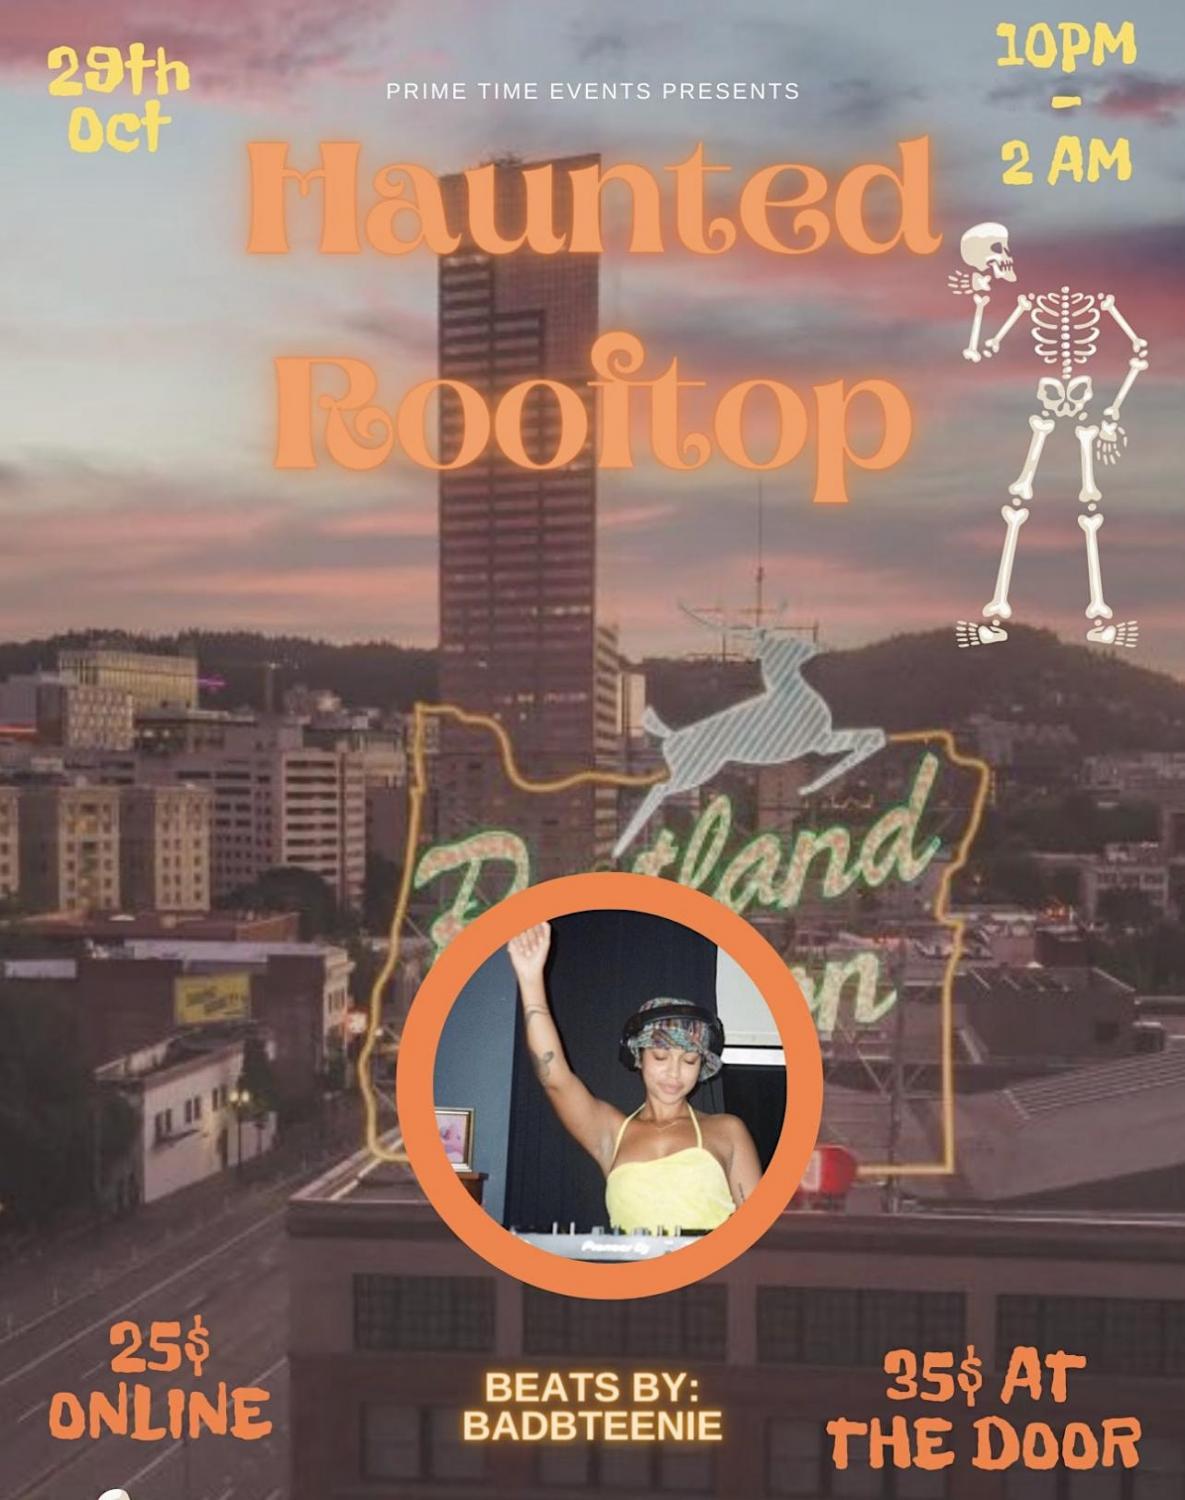 Haunted rooftop
Sat Oct 29, 10:00 PM - Sun Oct 30, 2:30 AM
in 9 days